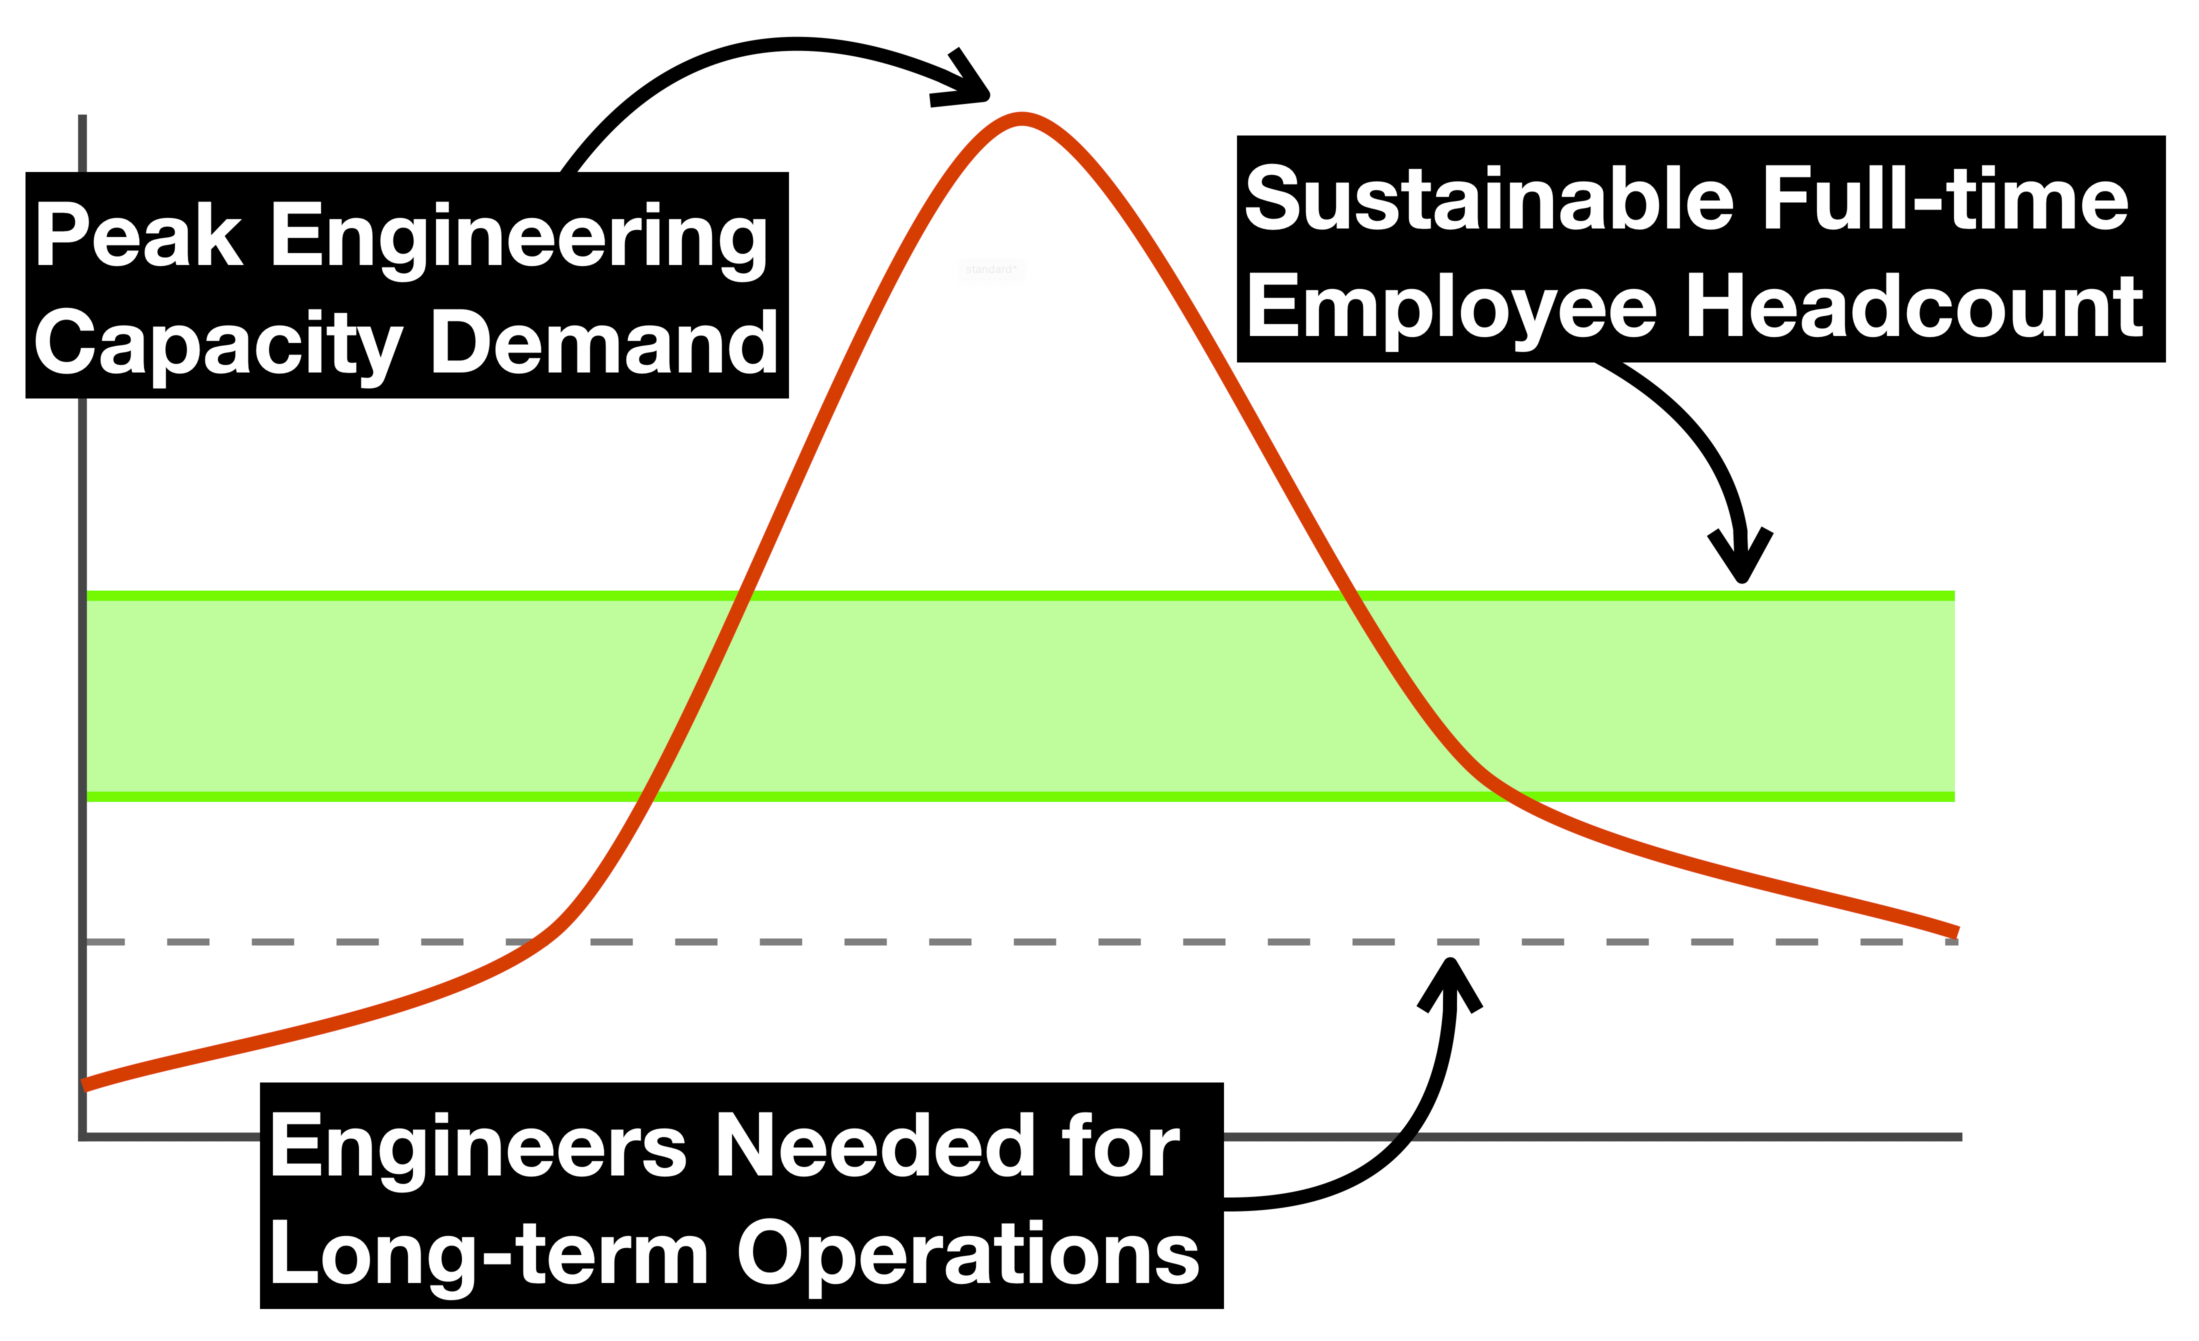 A simple graph showing that the ideal sustainable full-time employee headcount of an engineering org is somewhat above their long-term maintainenance needs but well below the peak engineering demand when building new things.